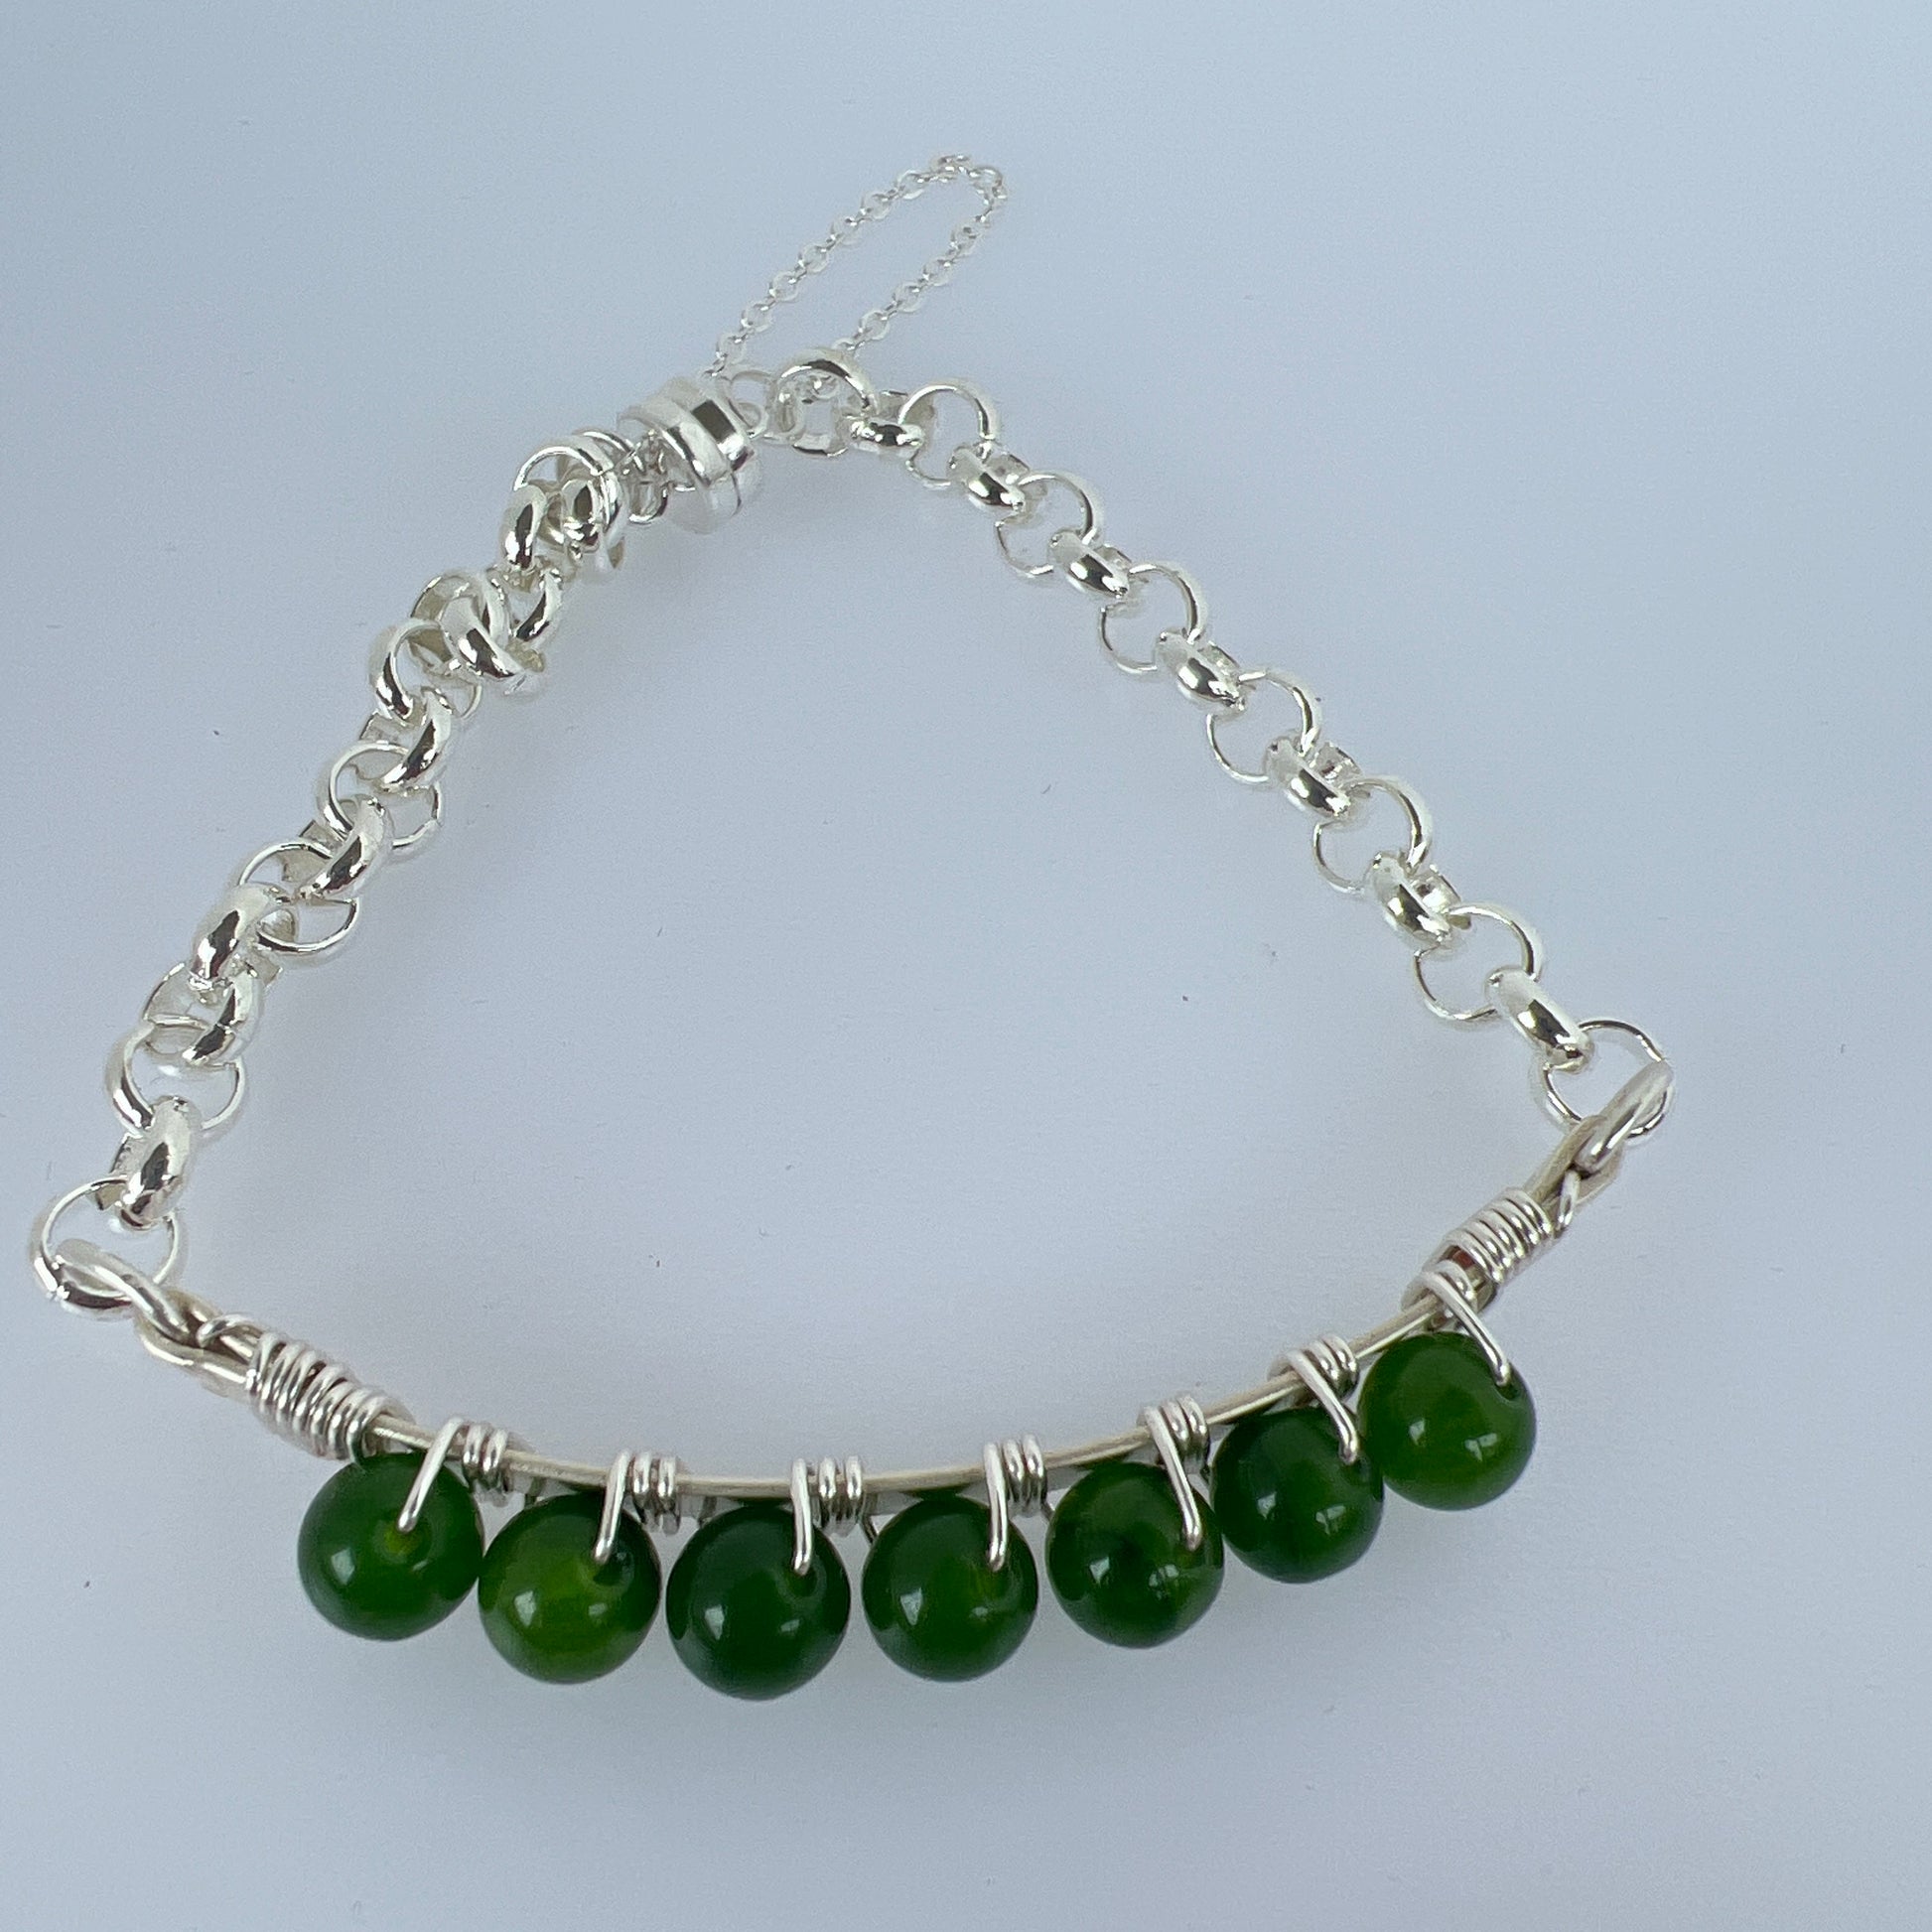 6mm Canadian Jade beads wire wrapped on silver plated with silver plate magnet bracelet